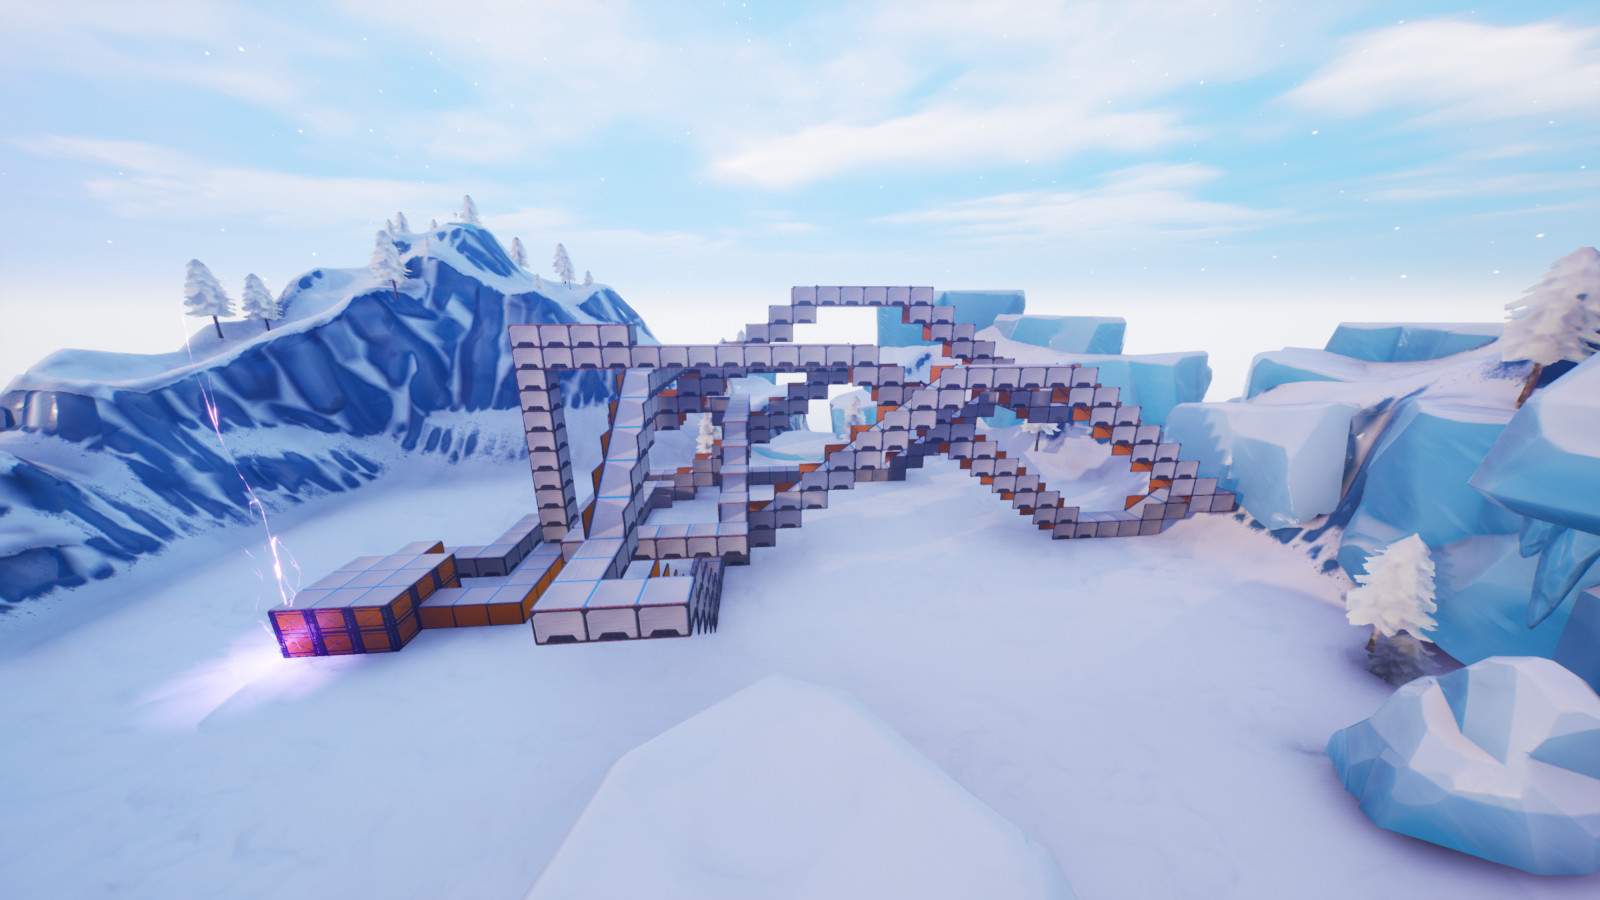 THE ICE COASTER REMASTERED!